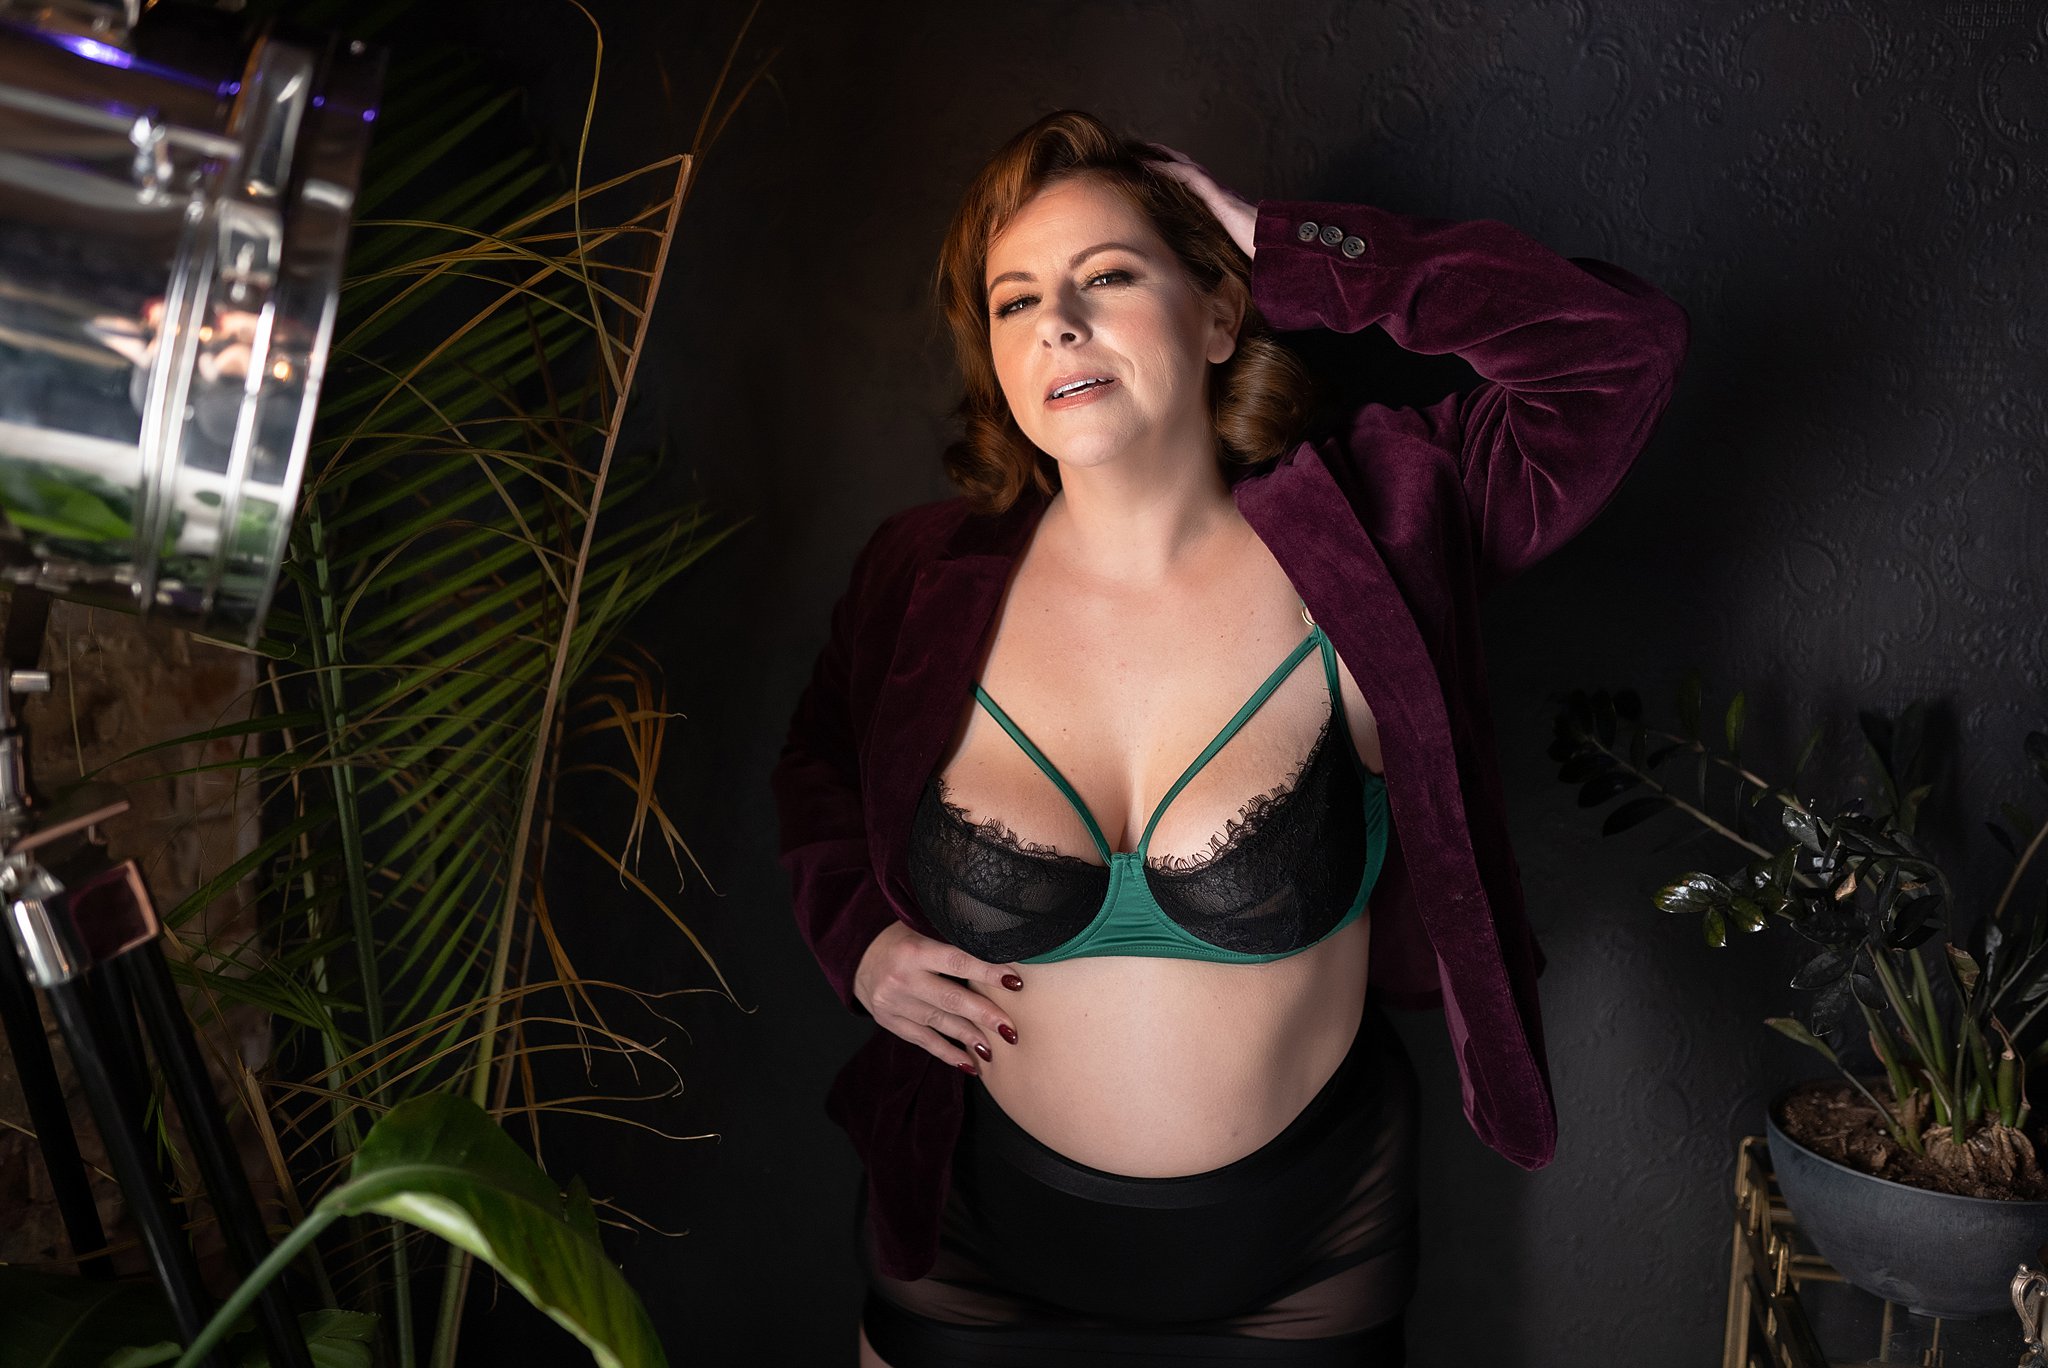 Miss P stands against a black damask textured wall during a 420 photoshoot with LeZandra Photography. She is happy and laughing. Miss P wears an emerald green satin bra with black lace and emerald green straps. Over her bra she is wearing a burgundy velvet jacket with black high waisted panties and a black sheer skirt.